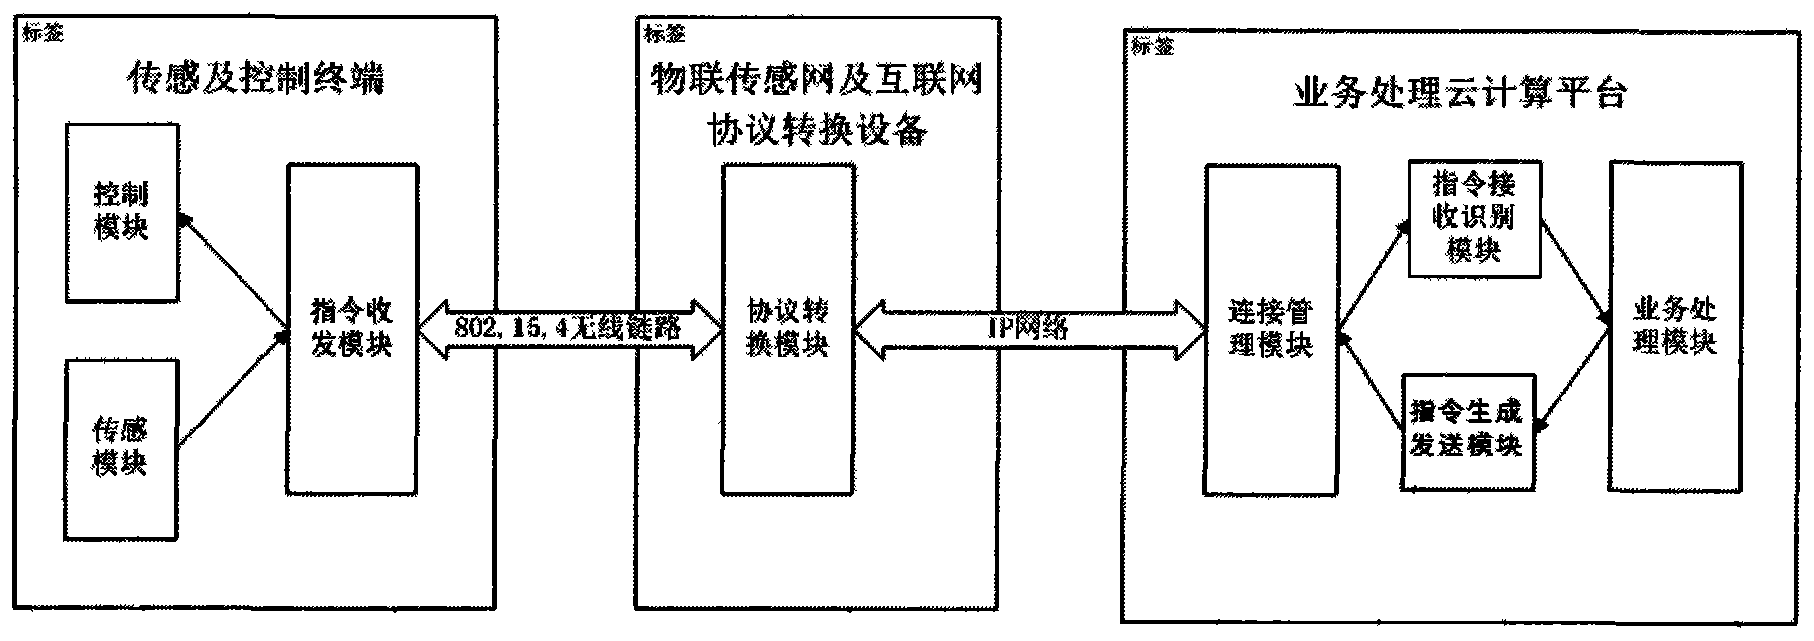 Implementing method for home control system based on network and cloud technology